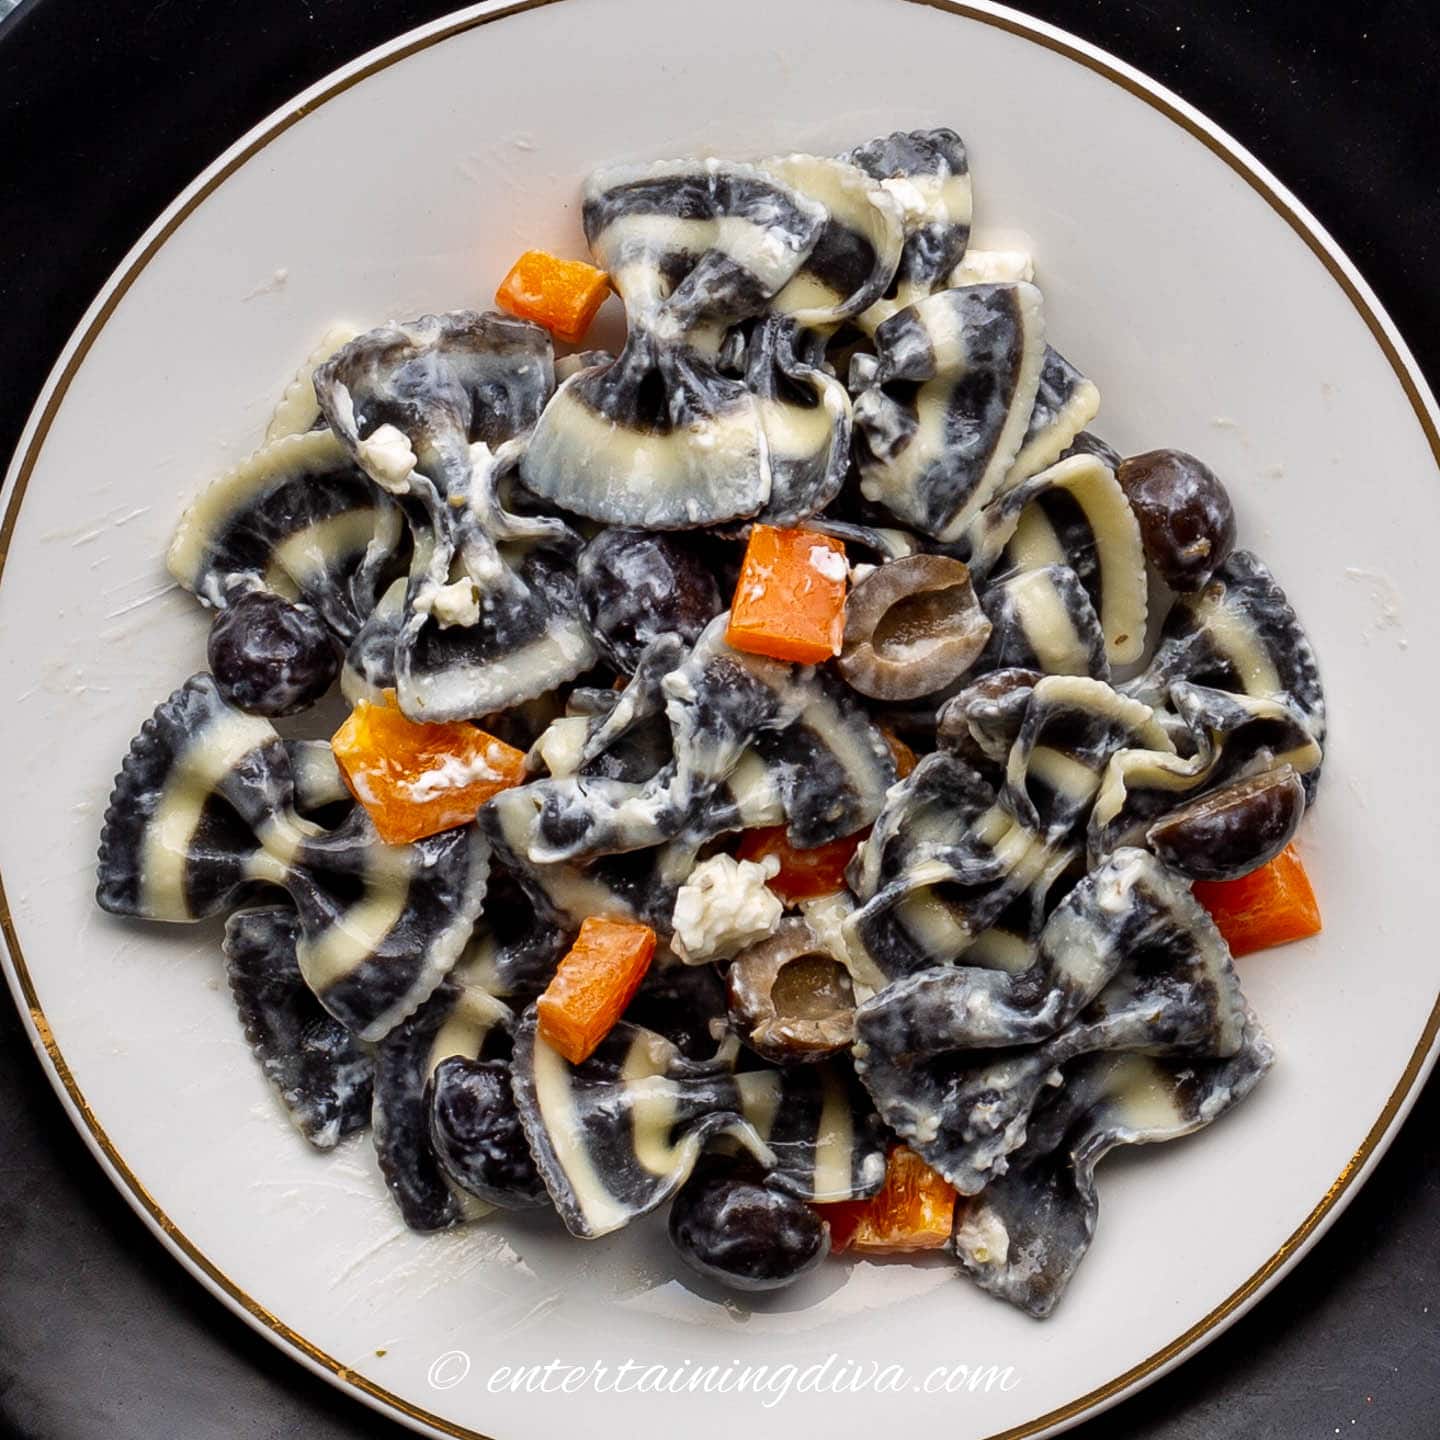 Black and white bow tie pasta with black olives, goat cheese and orange peppers